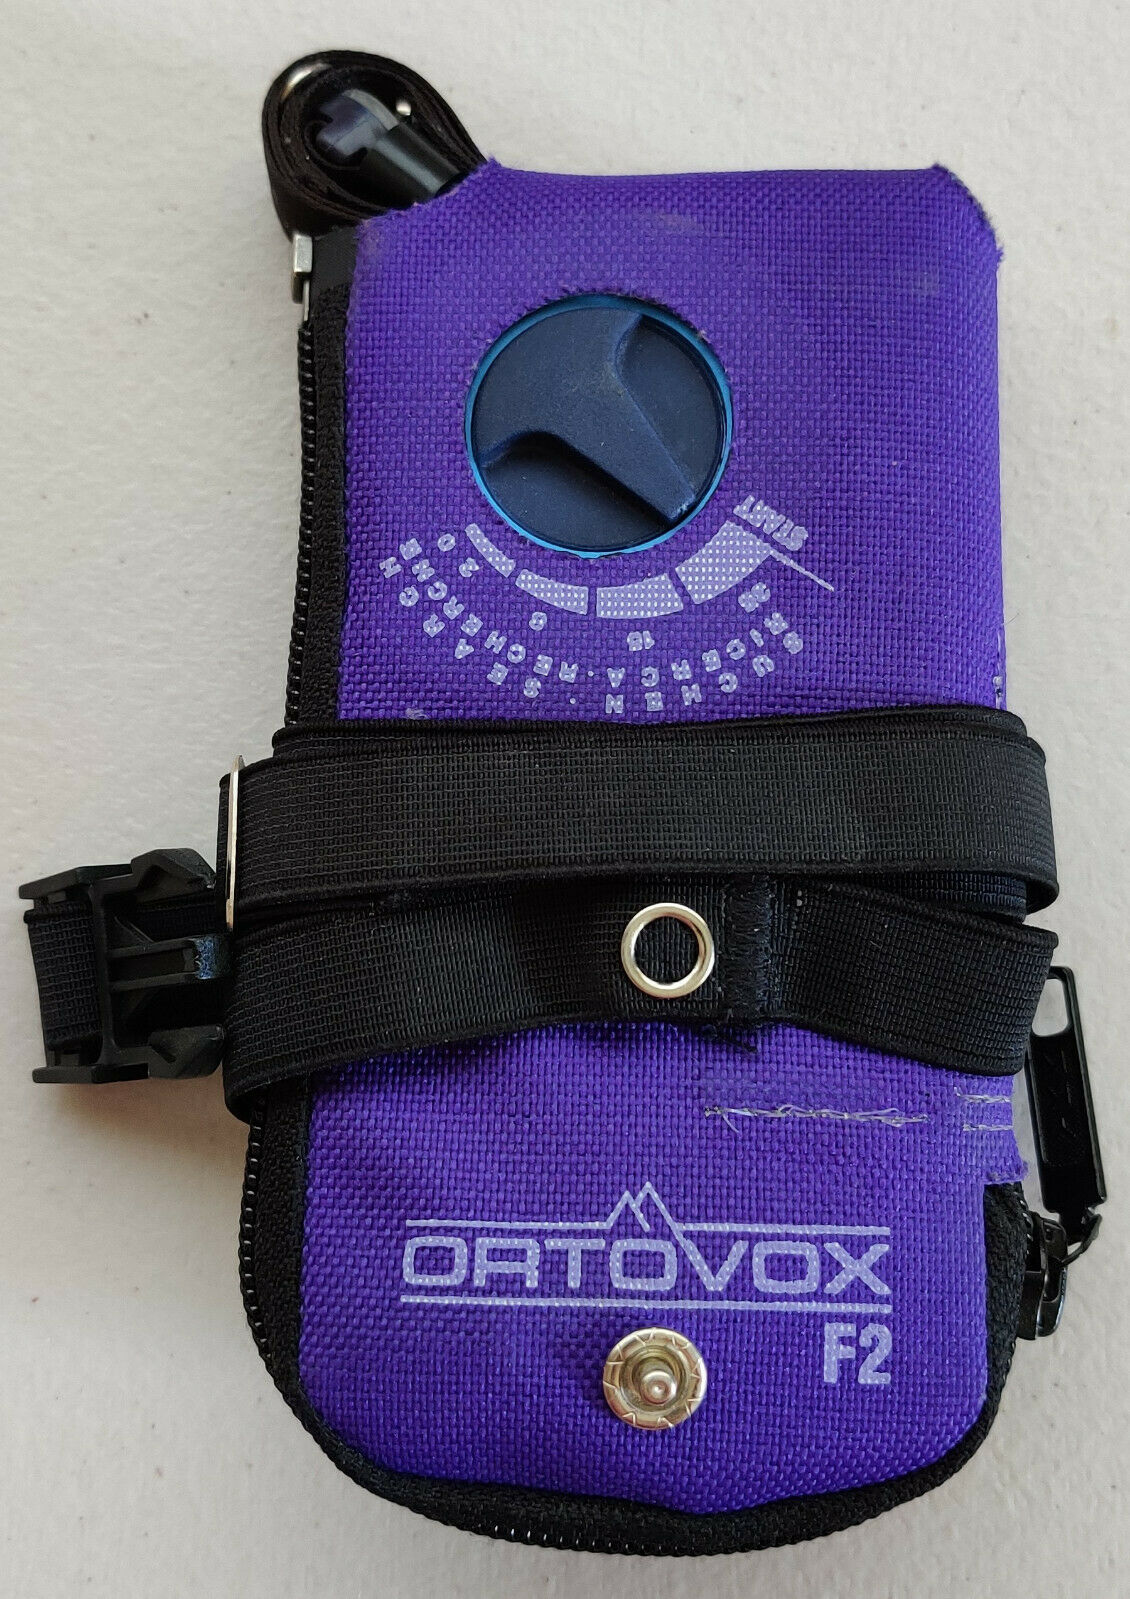 Ortovox F2 Avalache Beacon Transceiver Dual Frequency